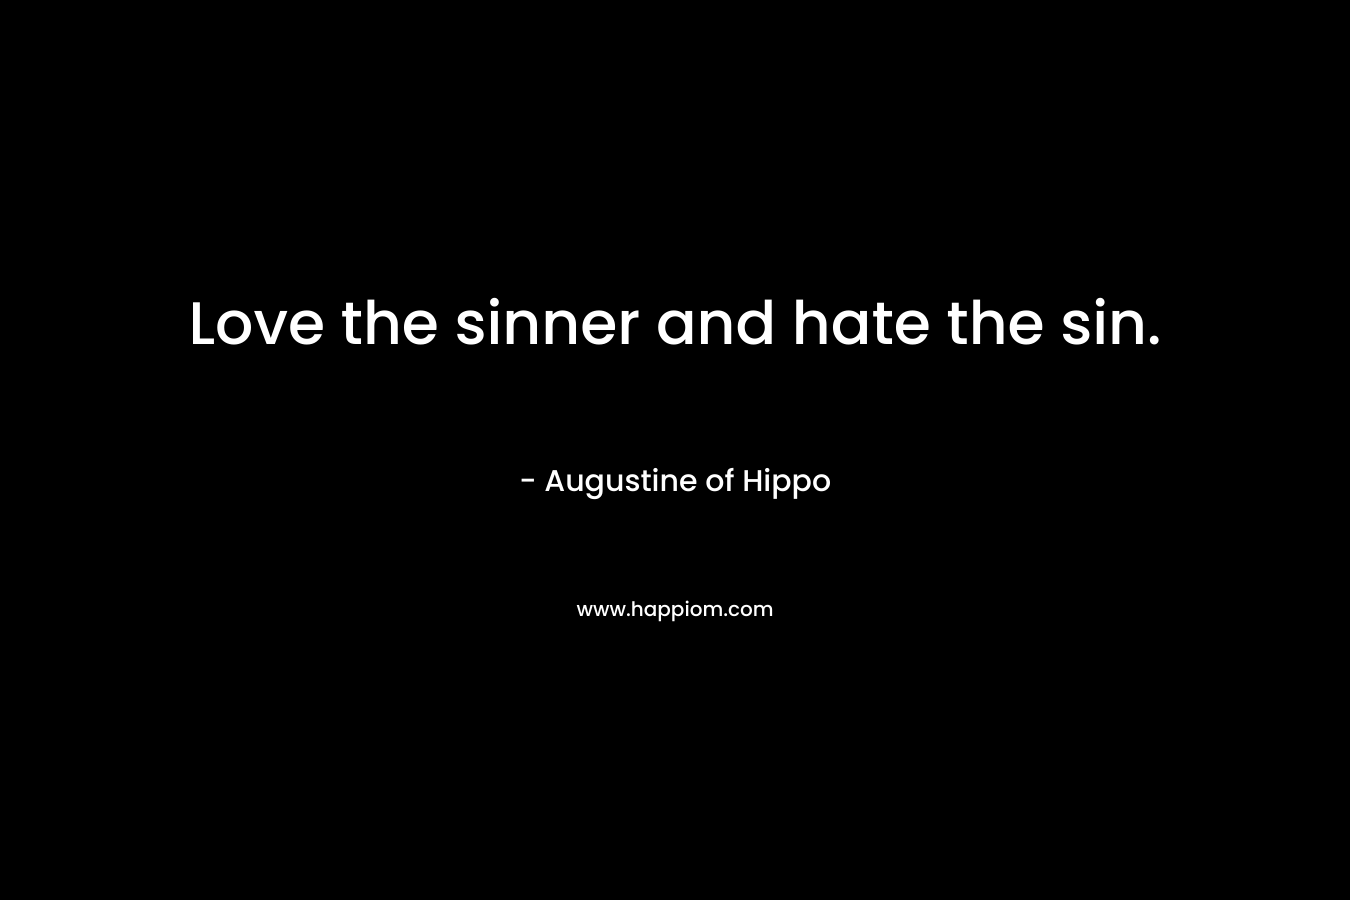 Love the sinner and hate the sin. – Augustine of Hippo